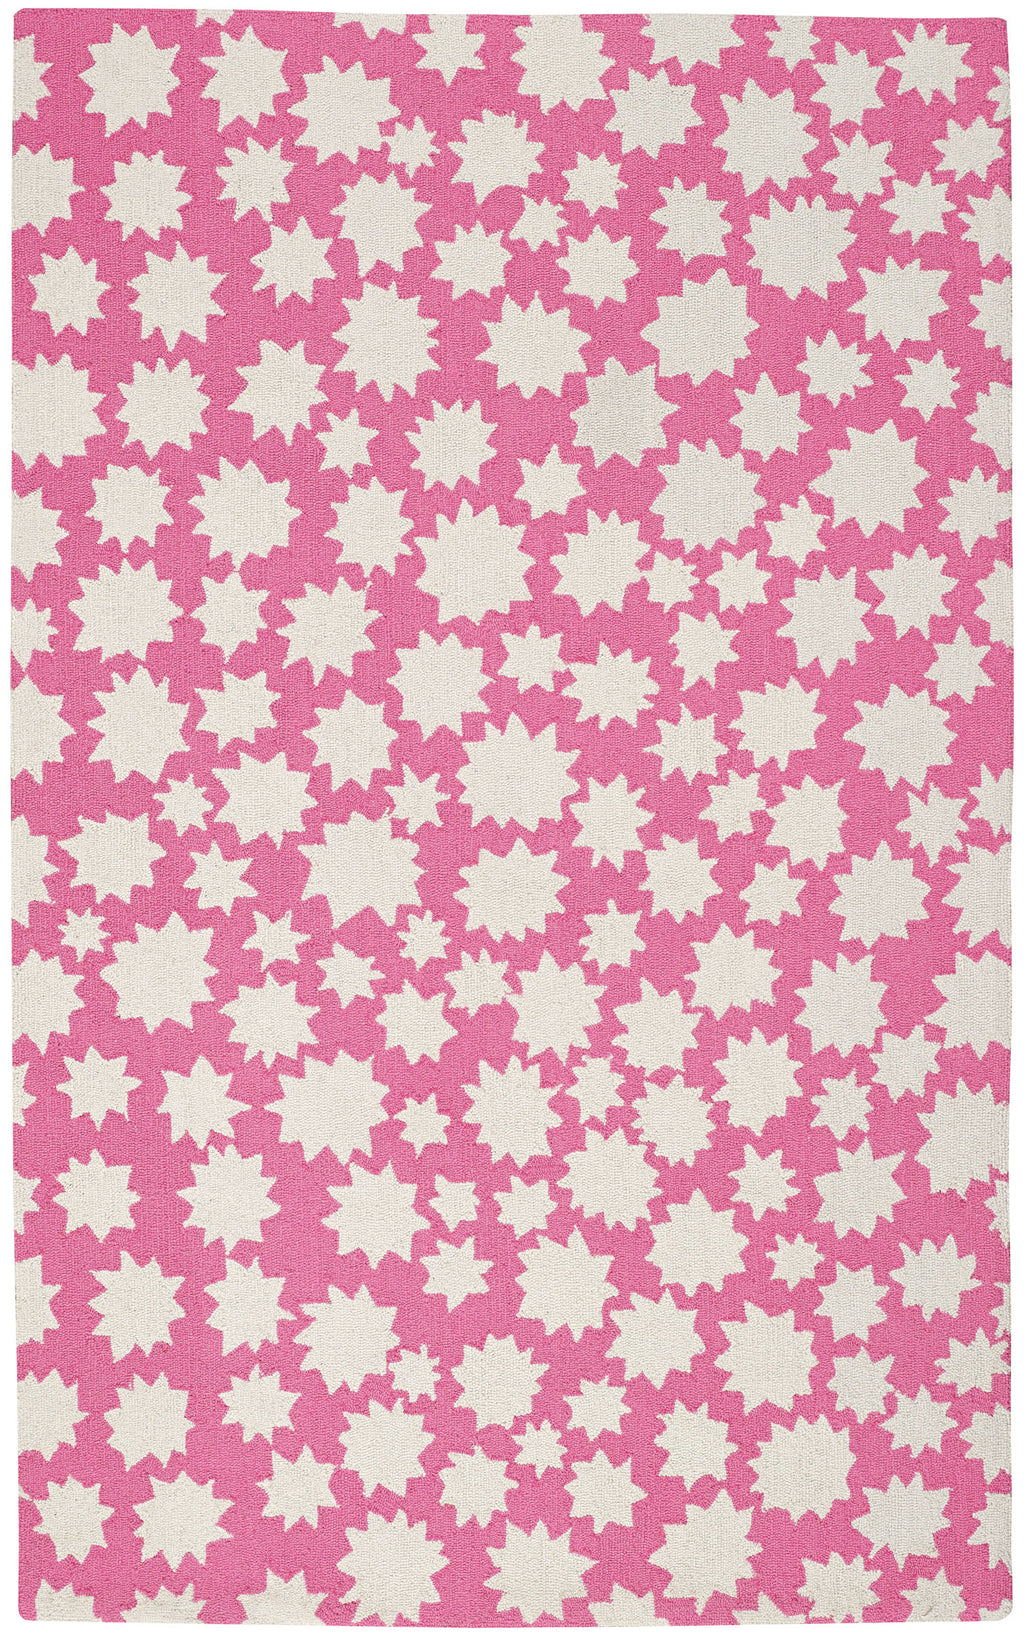 Capel Sky Heavenly 6301 Pink 515 Area Rug by Hable Construction main image